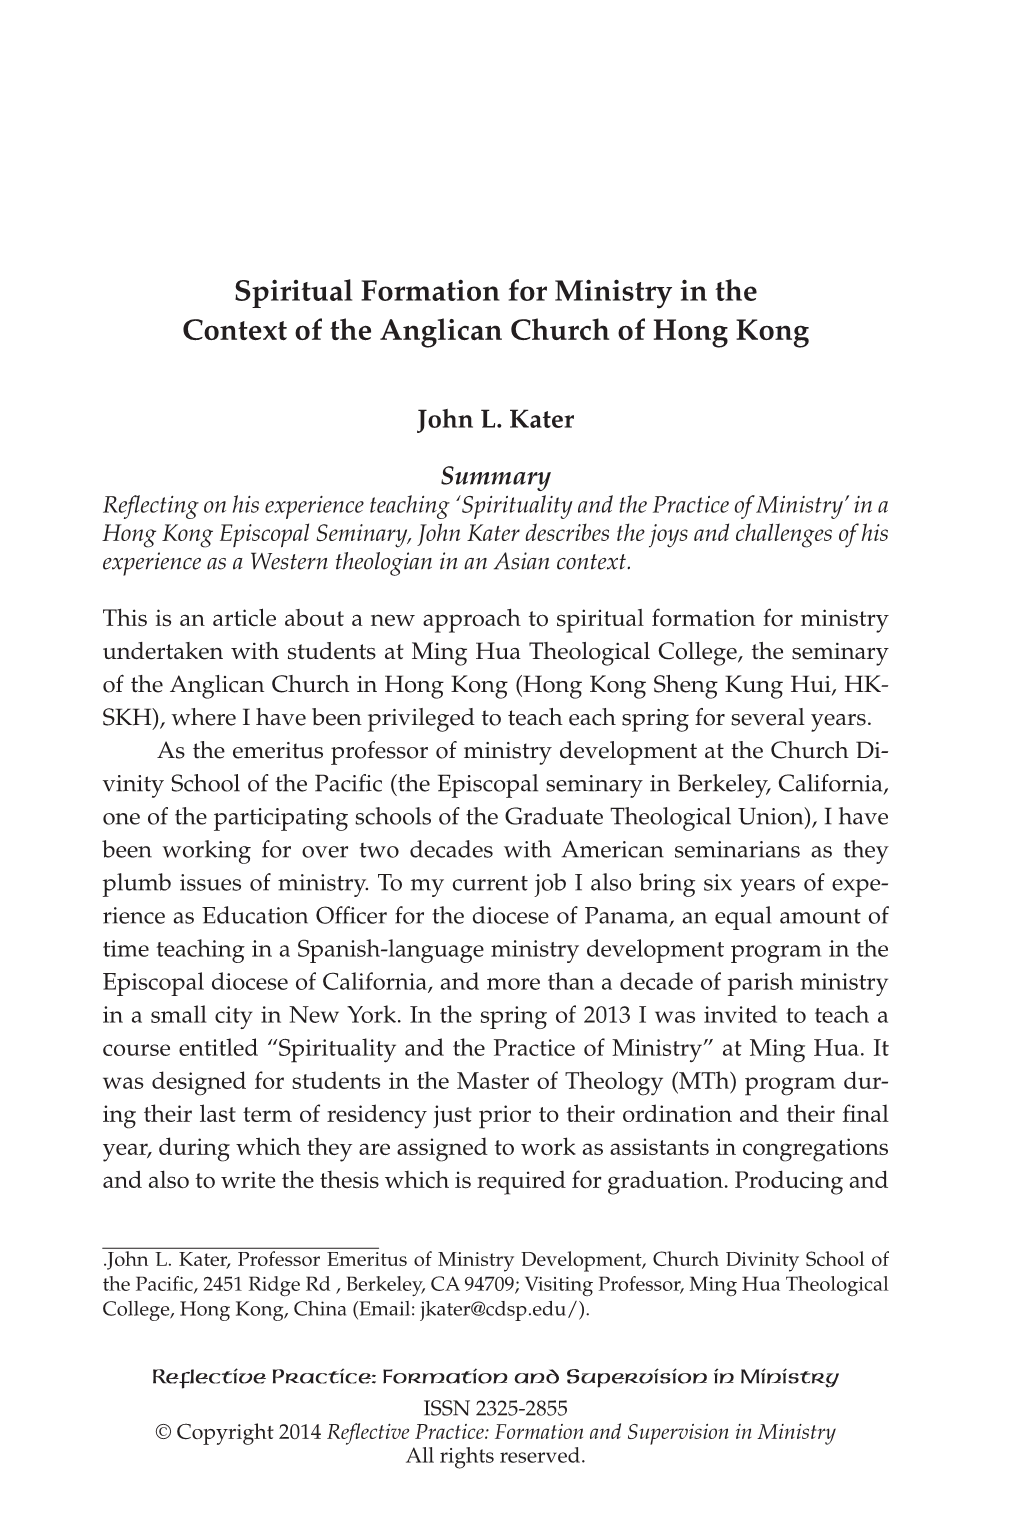 Spiritual Formation for Ministry in the Context of the Anglican Church of Hong Kong